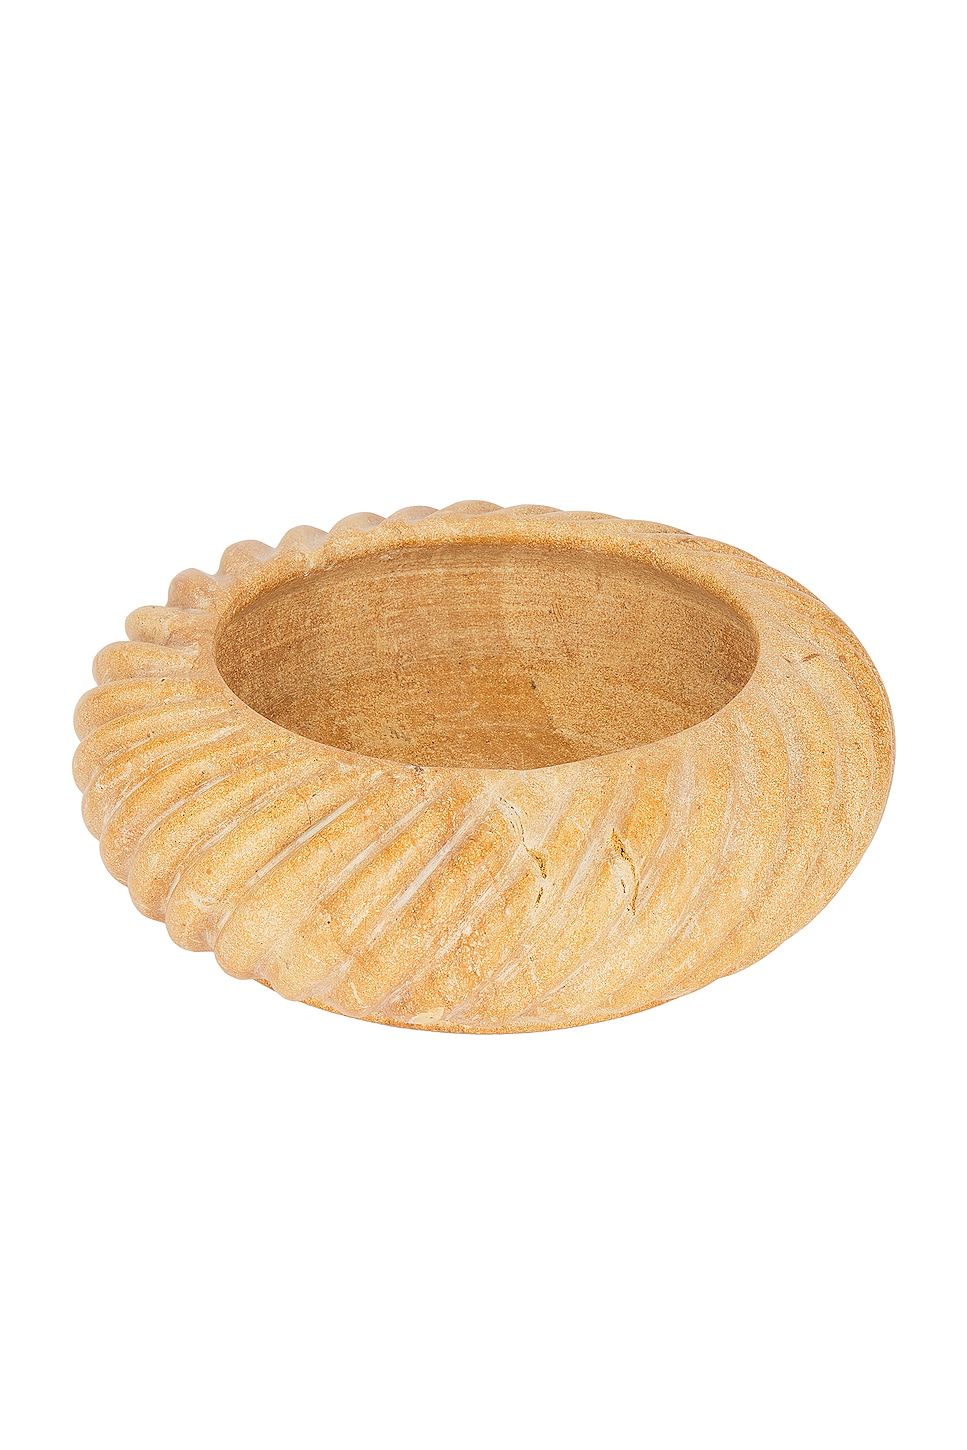 Image 1 of Anastasio Home Cruller Bowl in Honeycomb